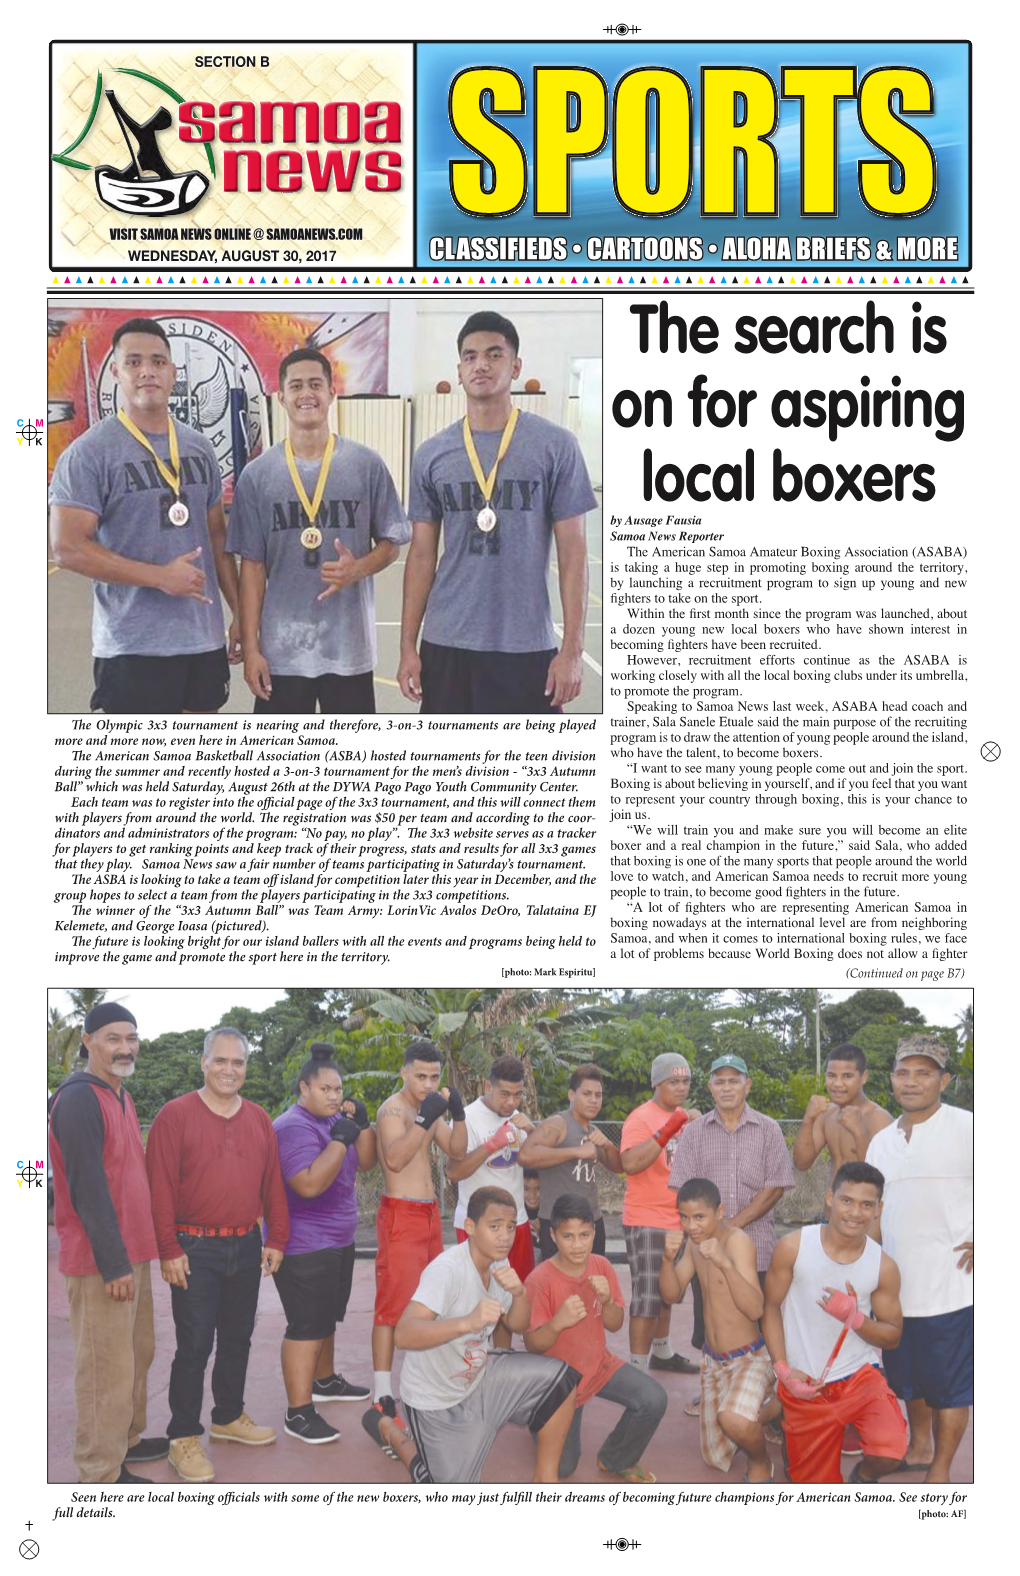 The Search Is on for Aspiring Local Boxers